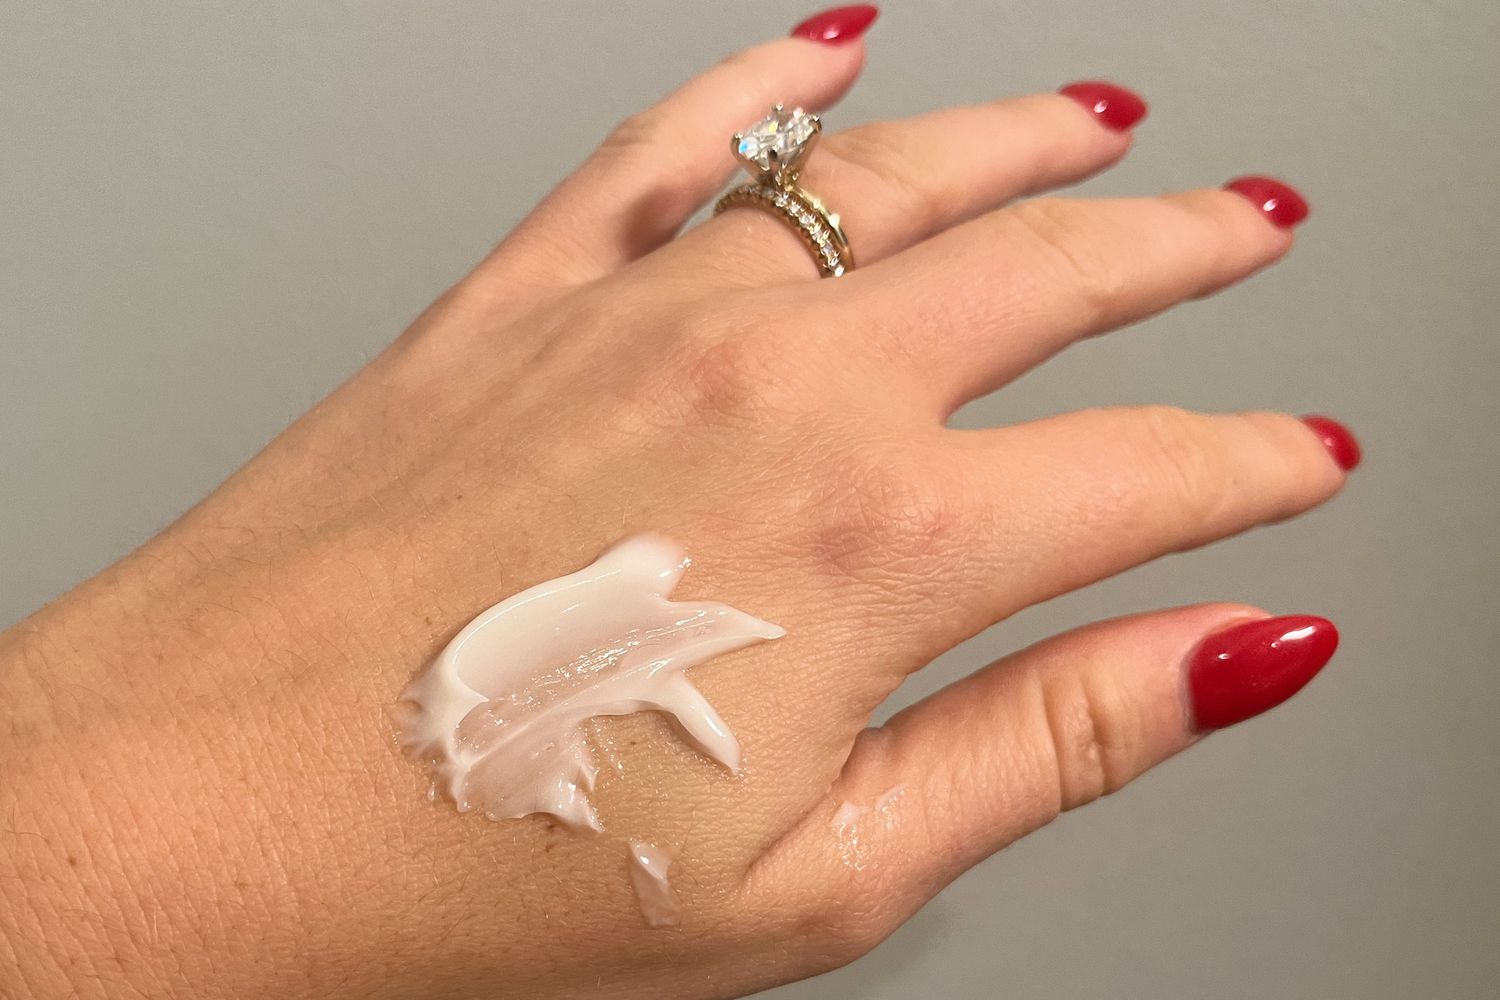 A smear of Estee Lauder Revitalizing Supreme+ Moisturizer Youth Power Creme on a person's hand